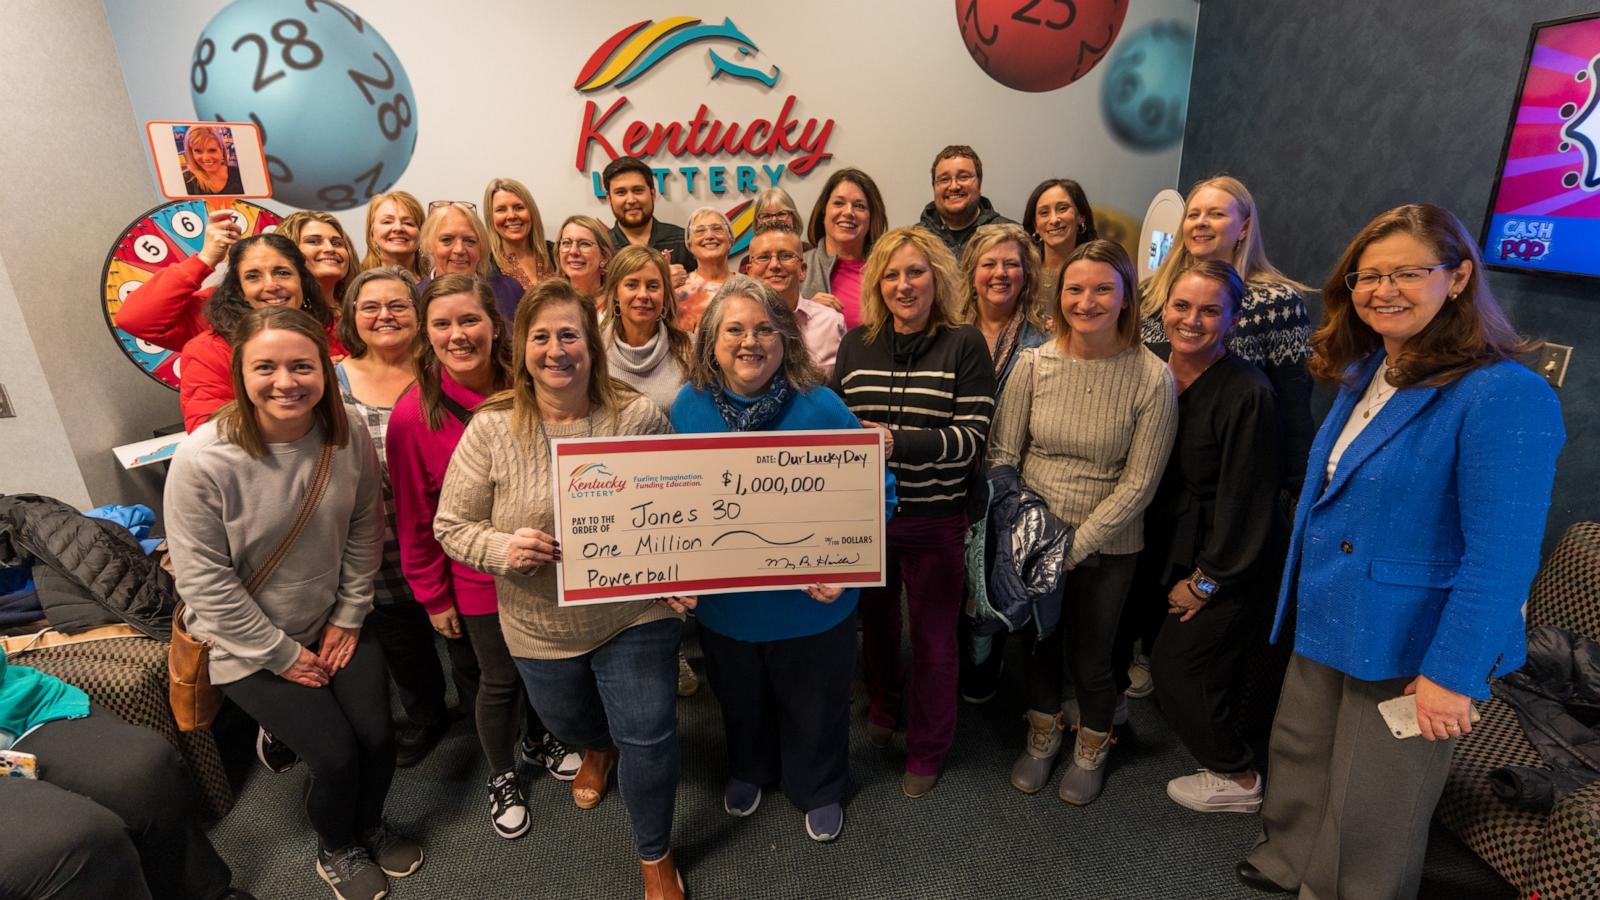 PHOTO: A group of former and current staffers at Rector A. Jones Middle School in Florence, Ky., call themselves the “Jones 30.” They won $1 million together on a Powerball ticket this week.